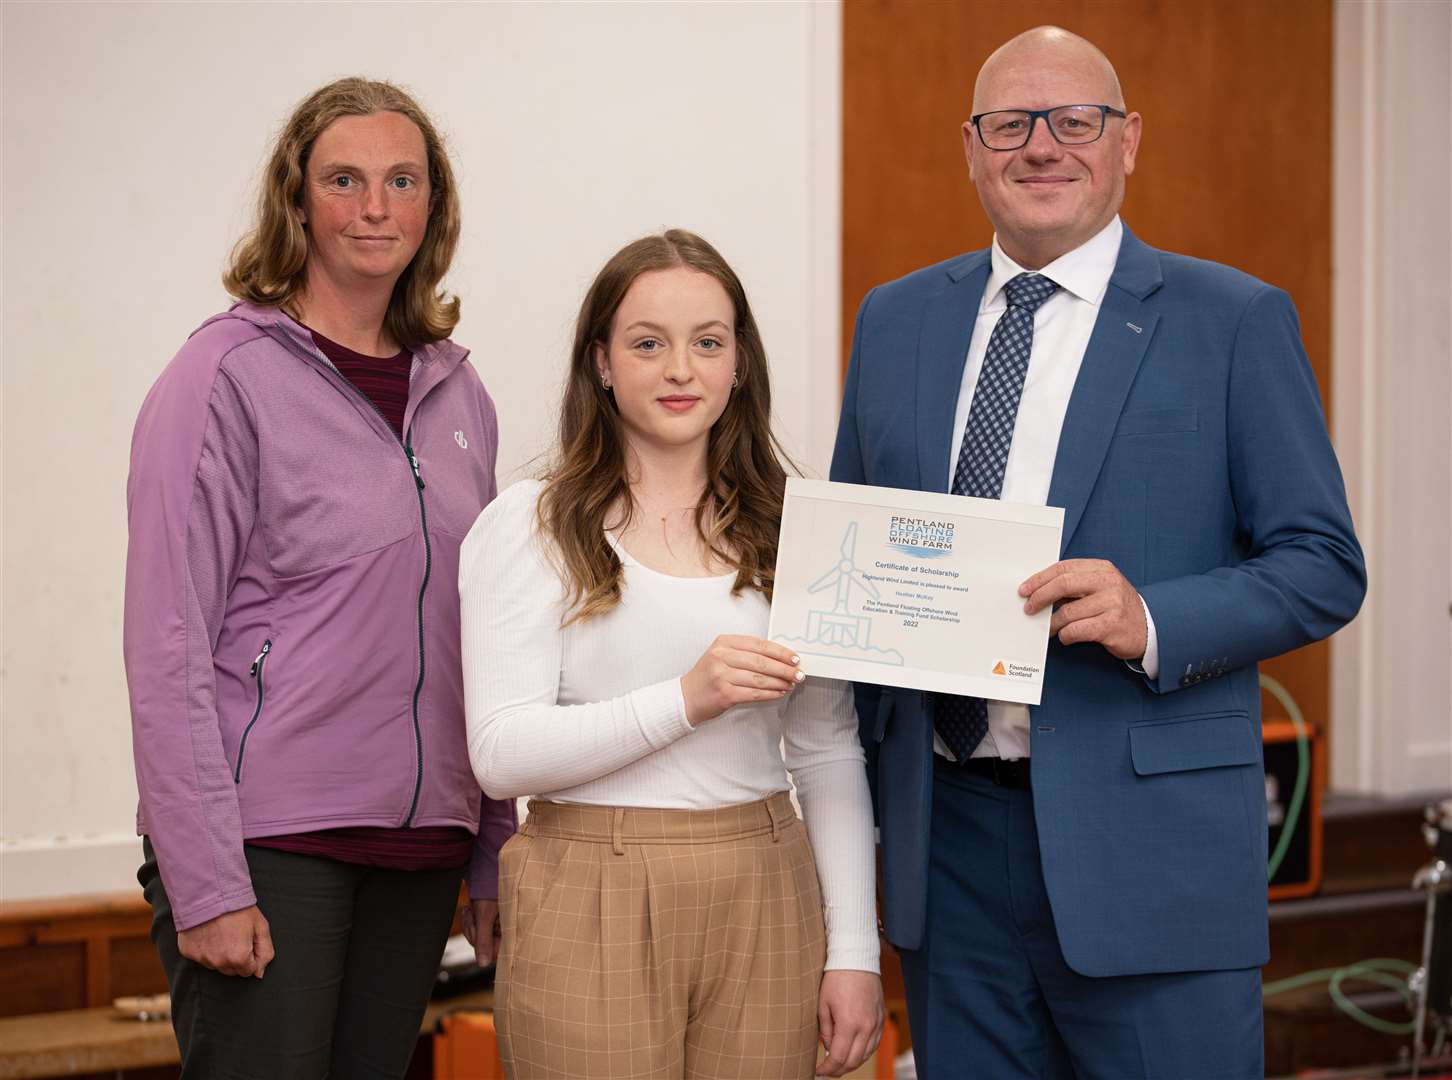 Eilidh Coll (left), from Foundation Scotland, and Anders Galsgaard, of Copenhagen Offshore Partners, with bursary recipient Heather McKay in June 2022.